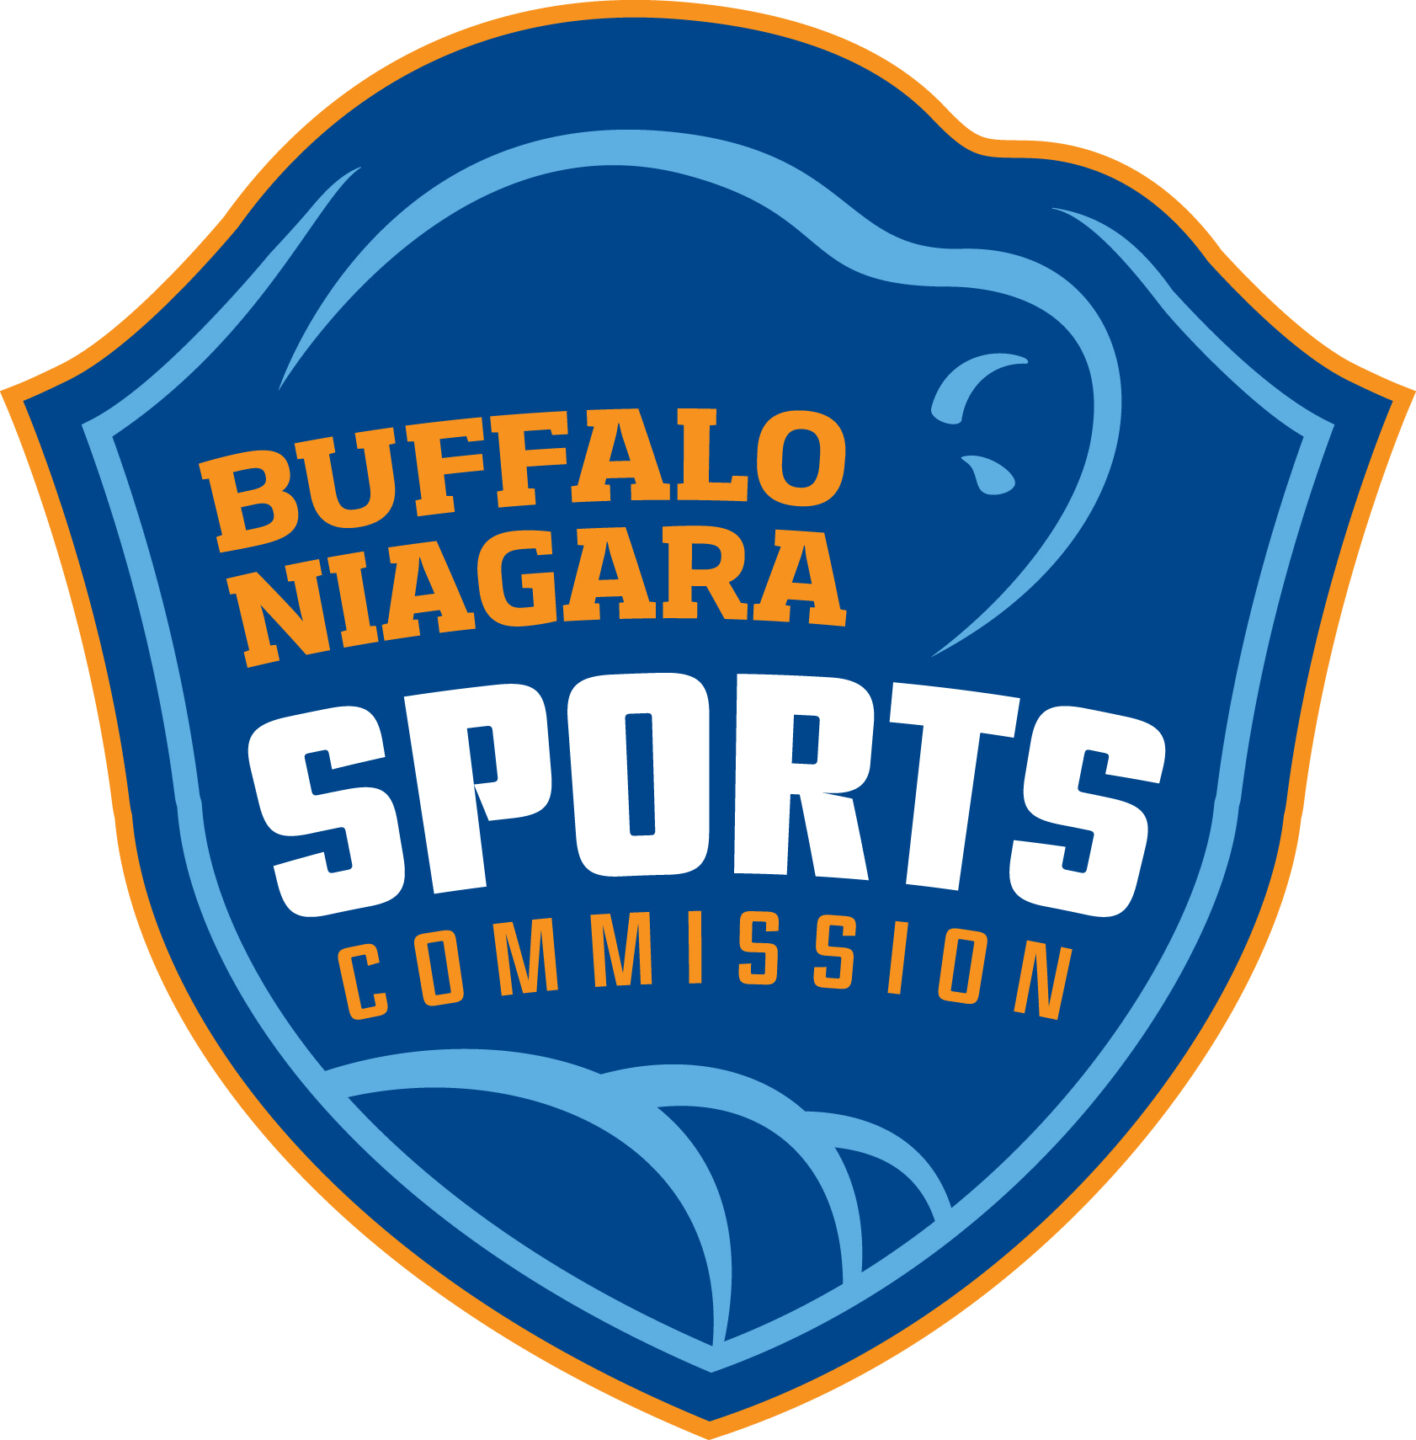 THE AAA BUFFALO CUP 2025 - Prospects by Sports Illustrated Hockey